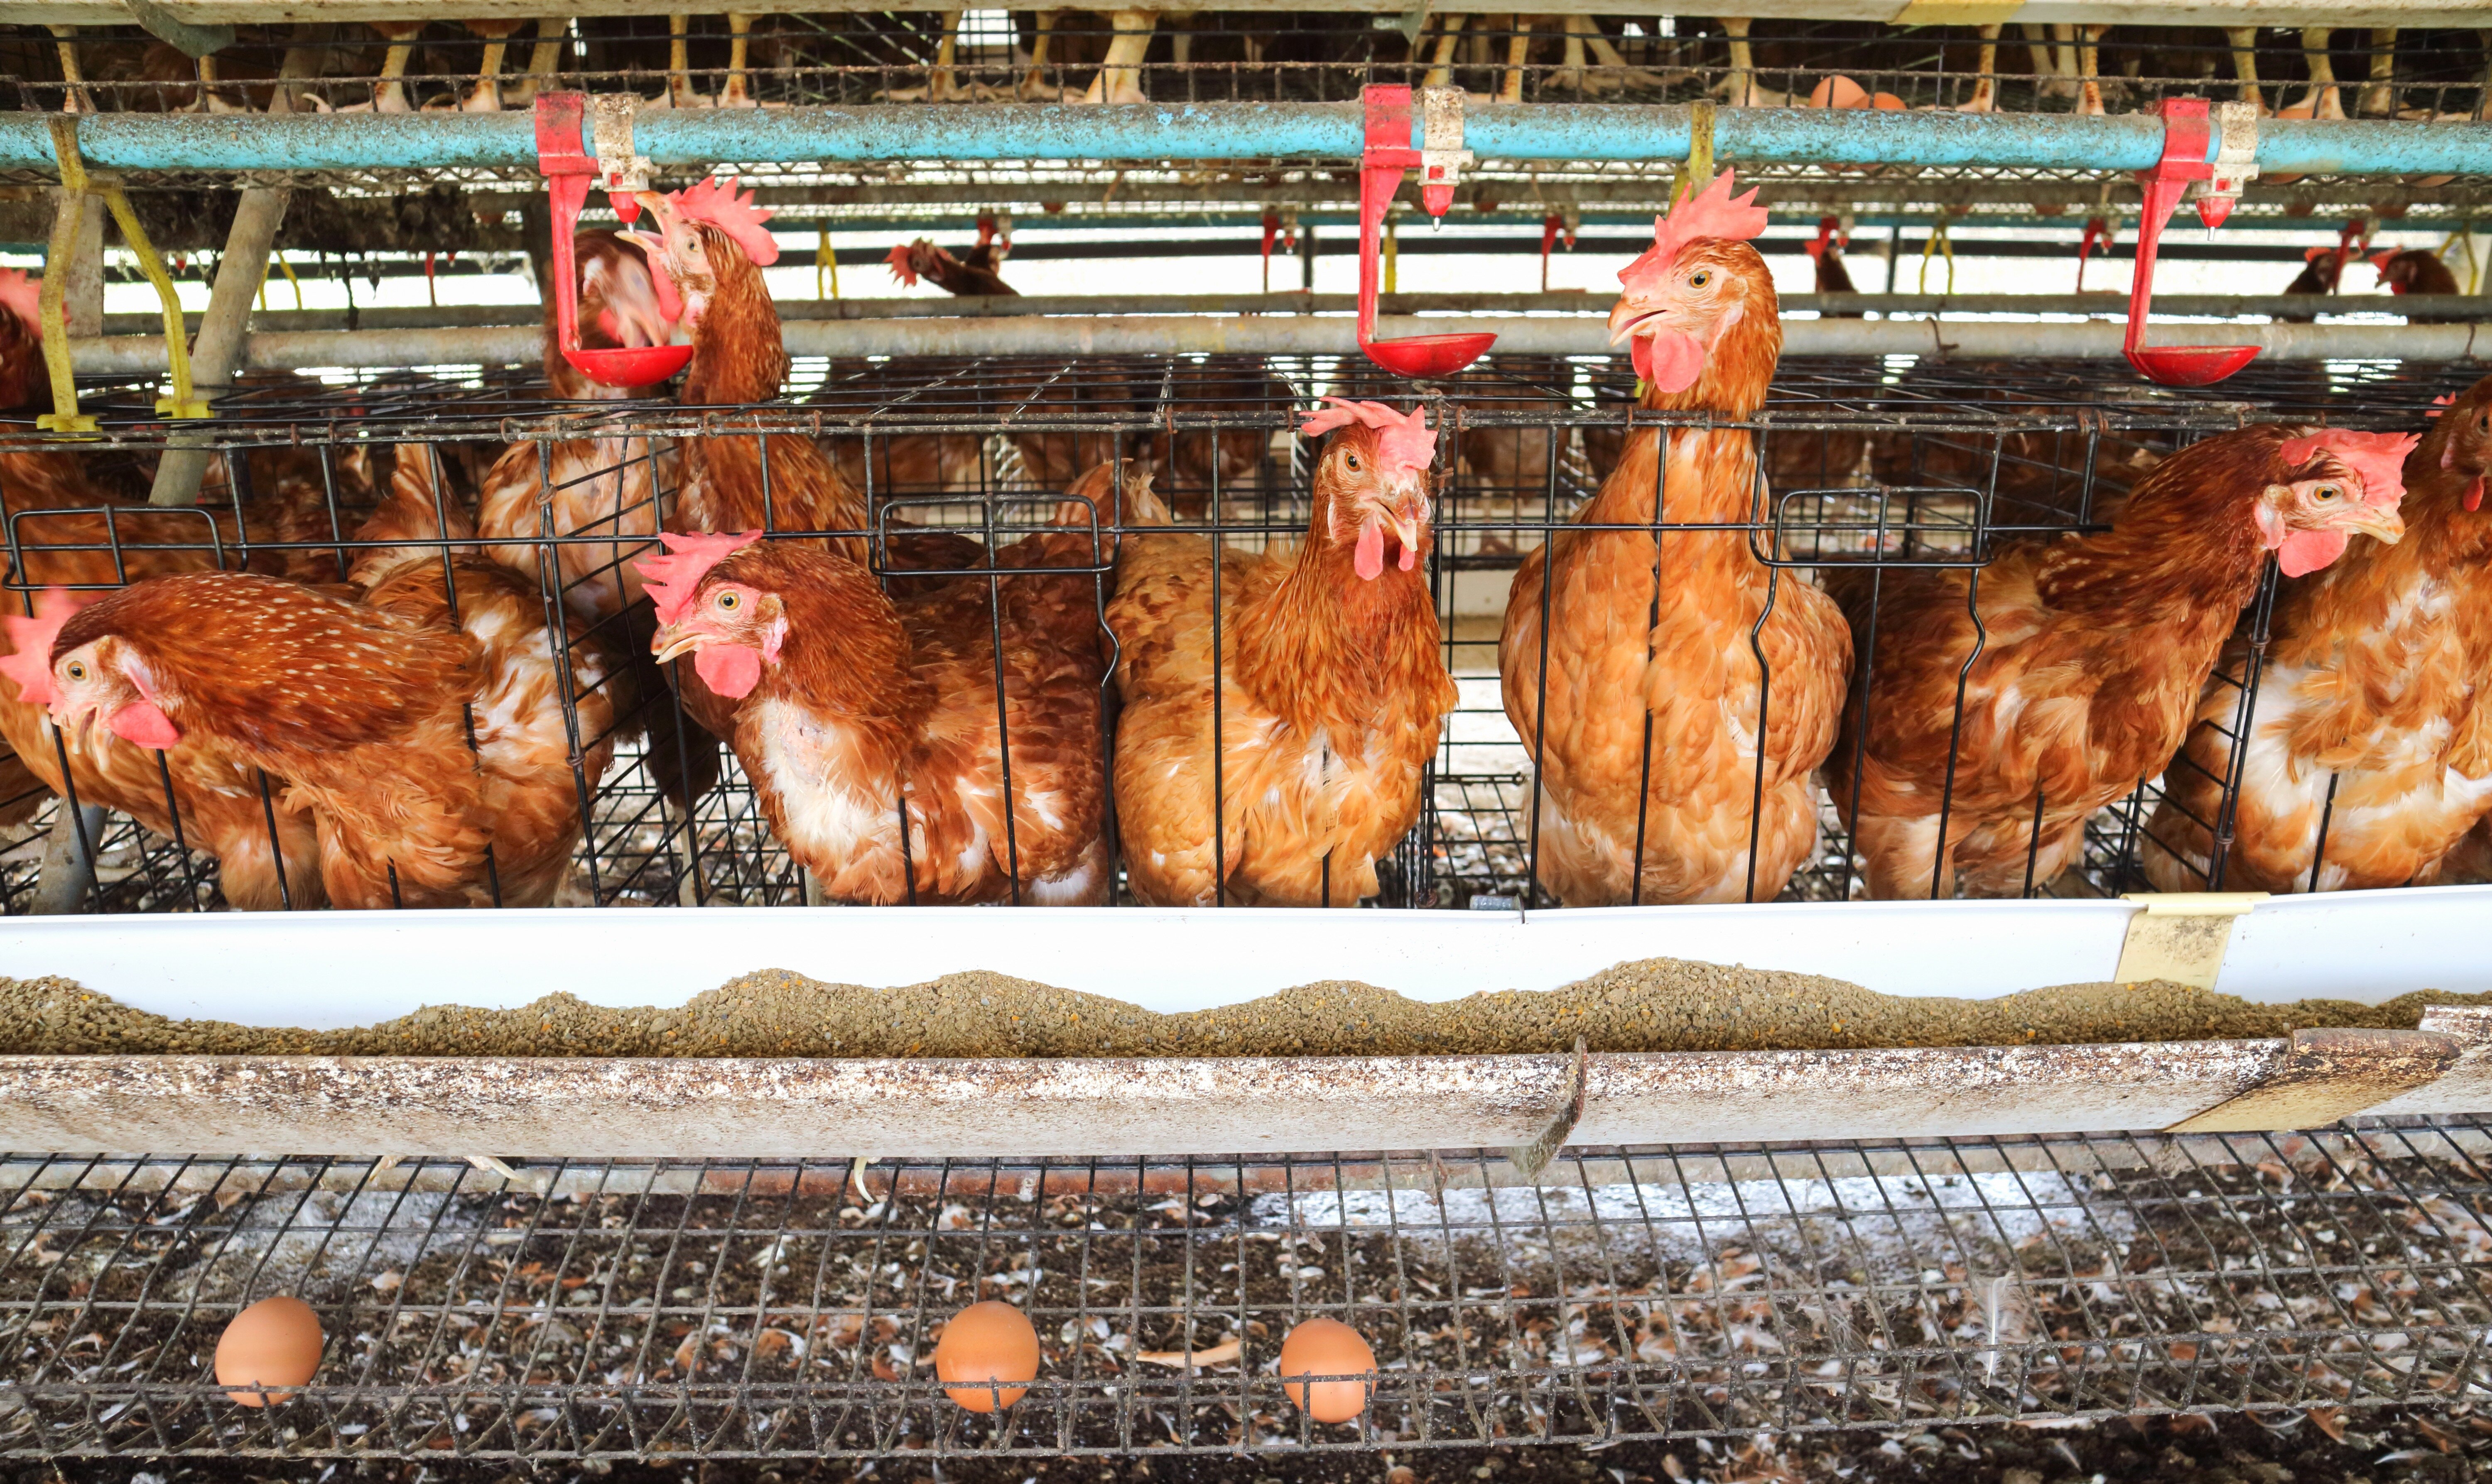 Caterers urged to check chicken provenance as sales soar